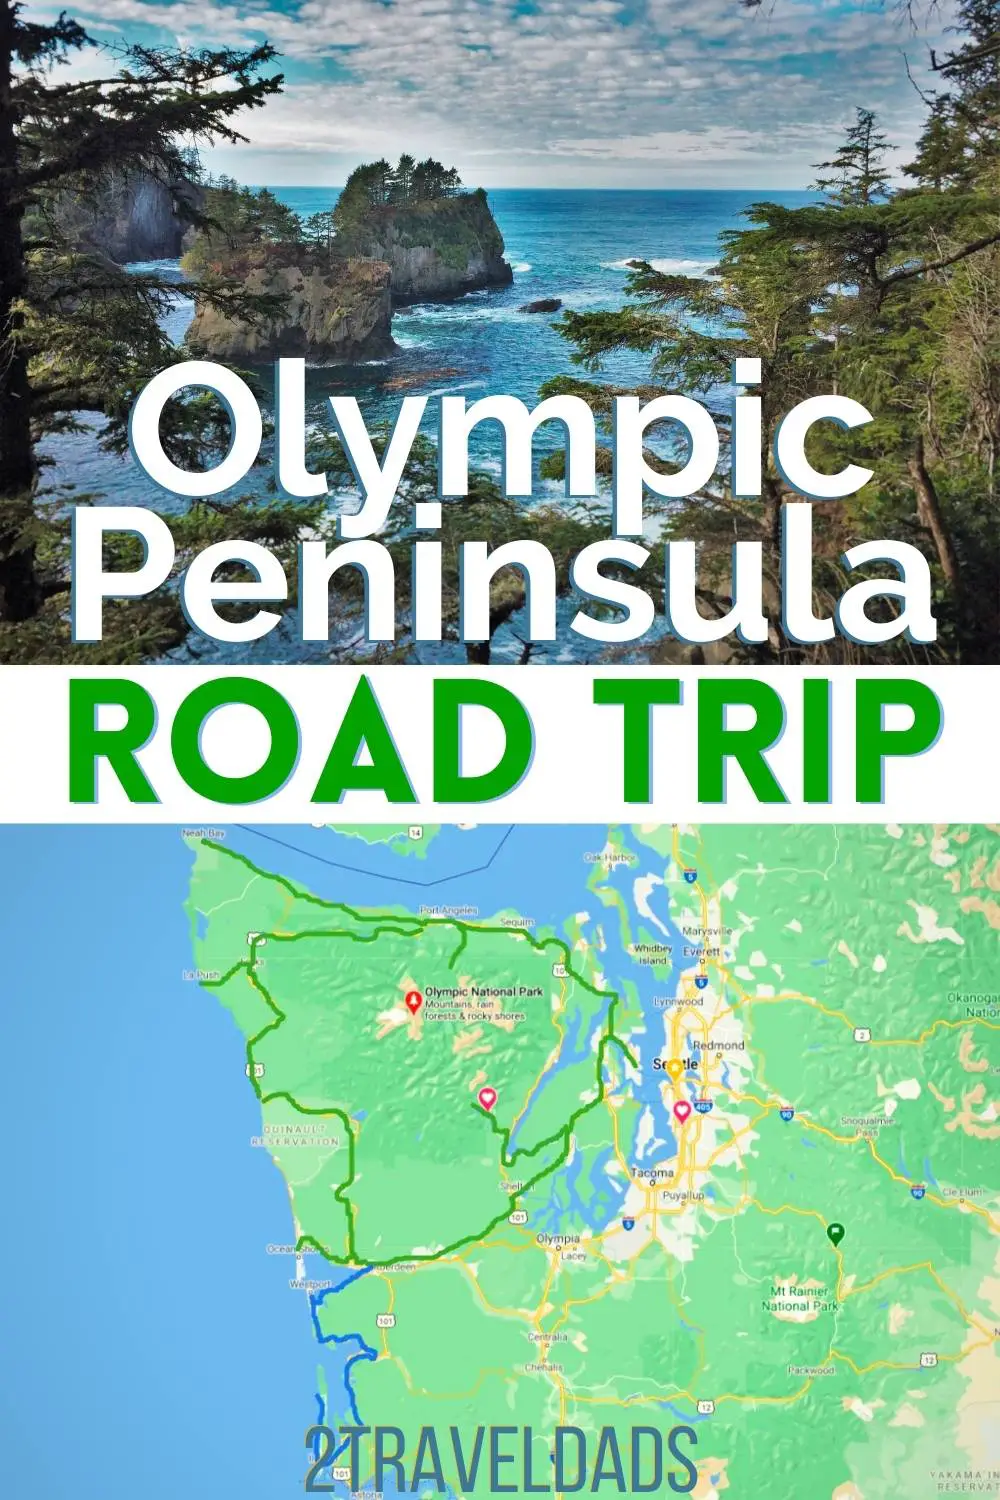 An Olympic Peninsula Road Trip is a great weekend getaway or local vacation near Seattle. See the best stops around Highway 101, waterfalls and hikes in Olympic National Park, beautiful small towns and the rugged Washington Coast. Perfect Pacific Northwest vacation itinerary.